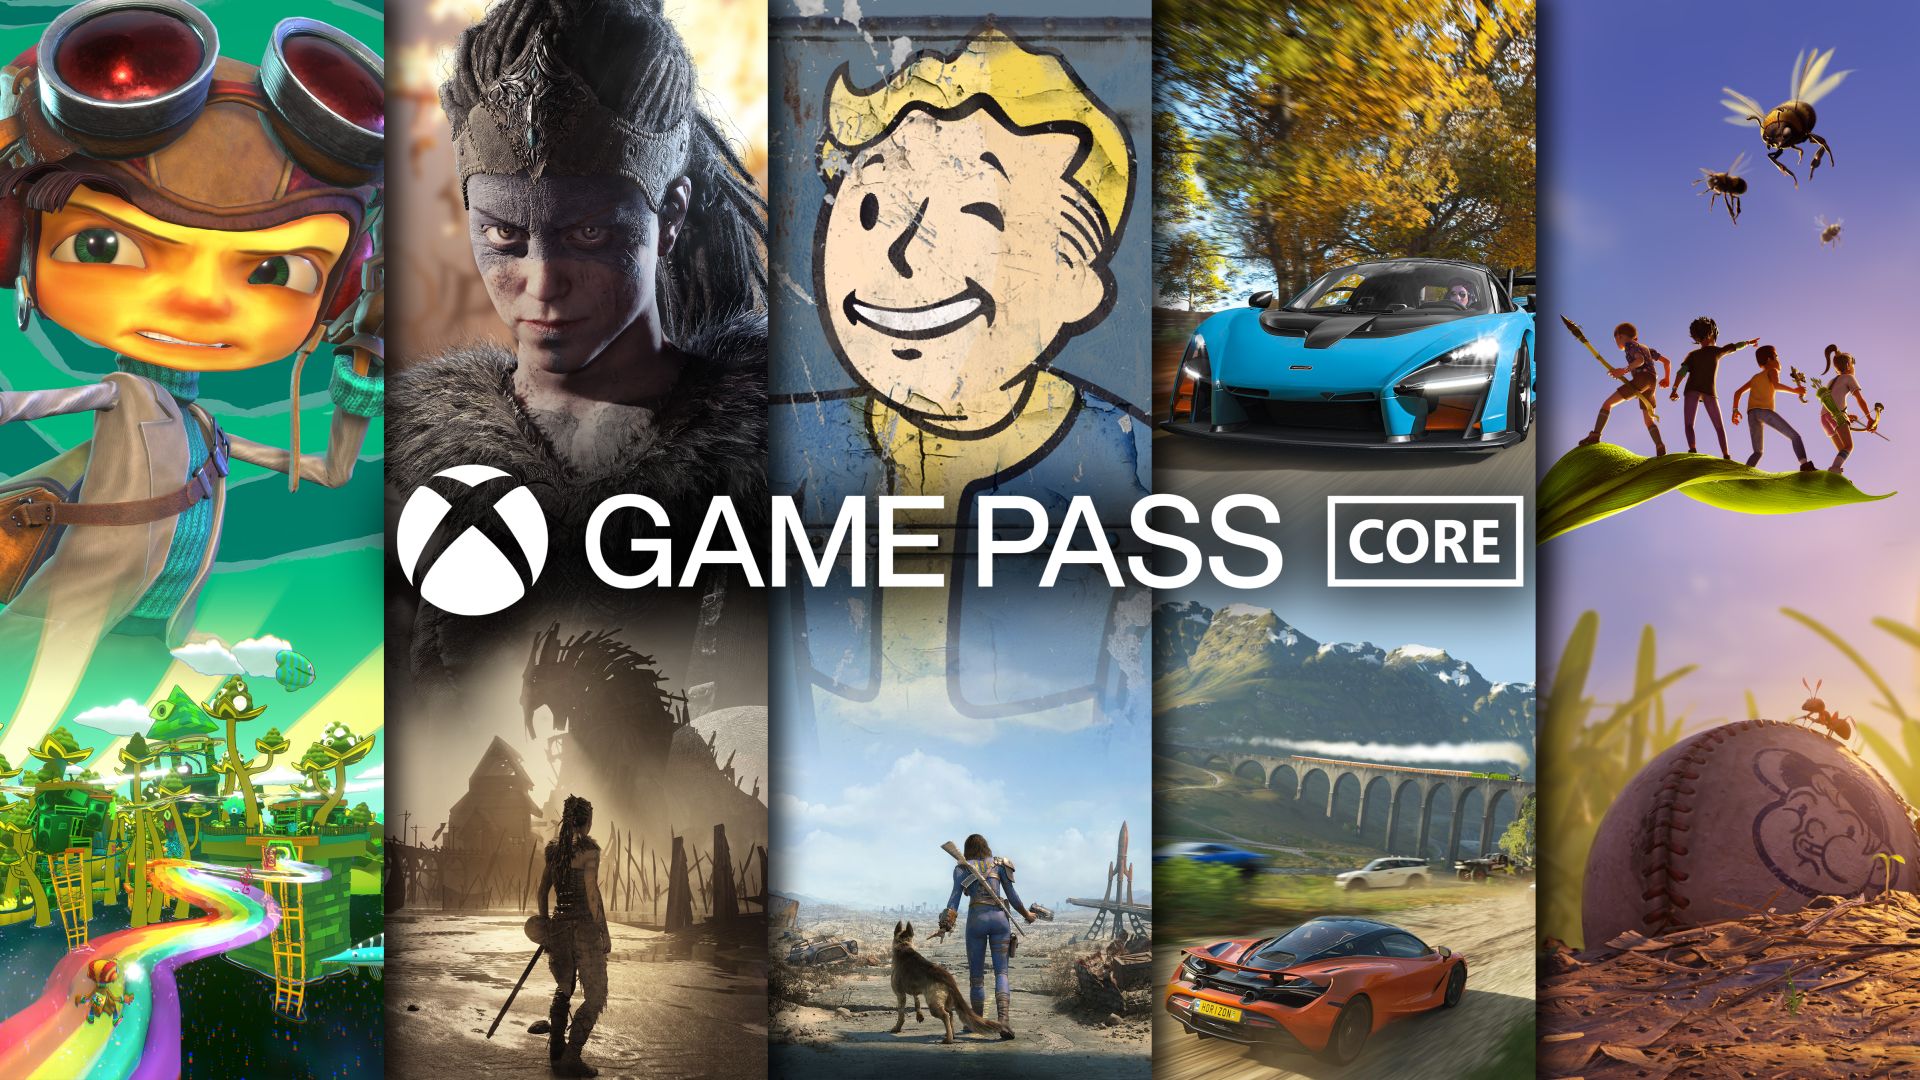 Lies of P reviews suggest good things for its Xbox Game Pass launch